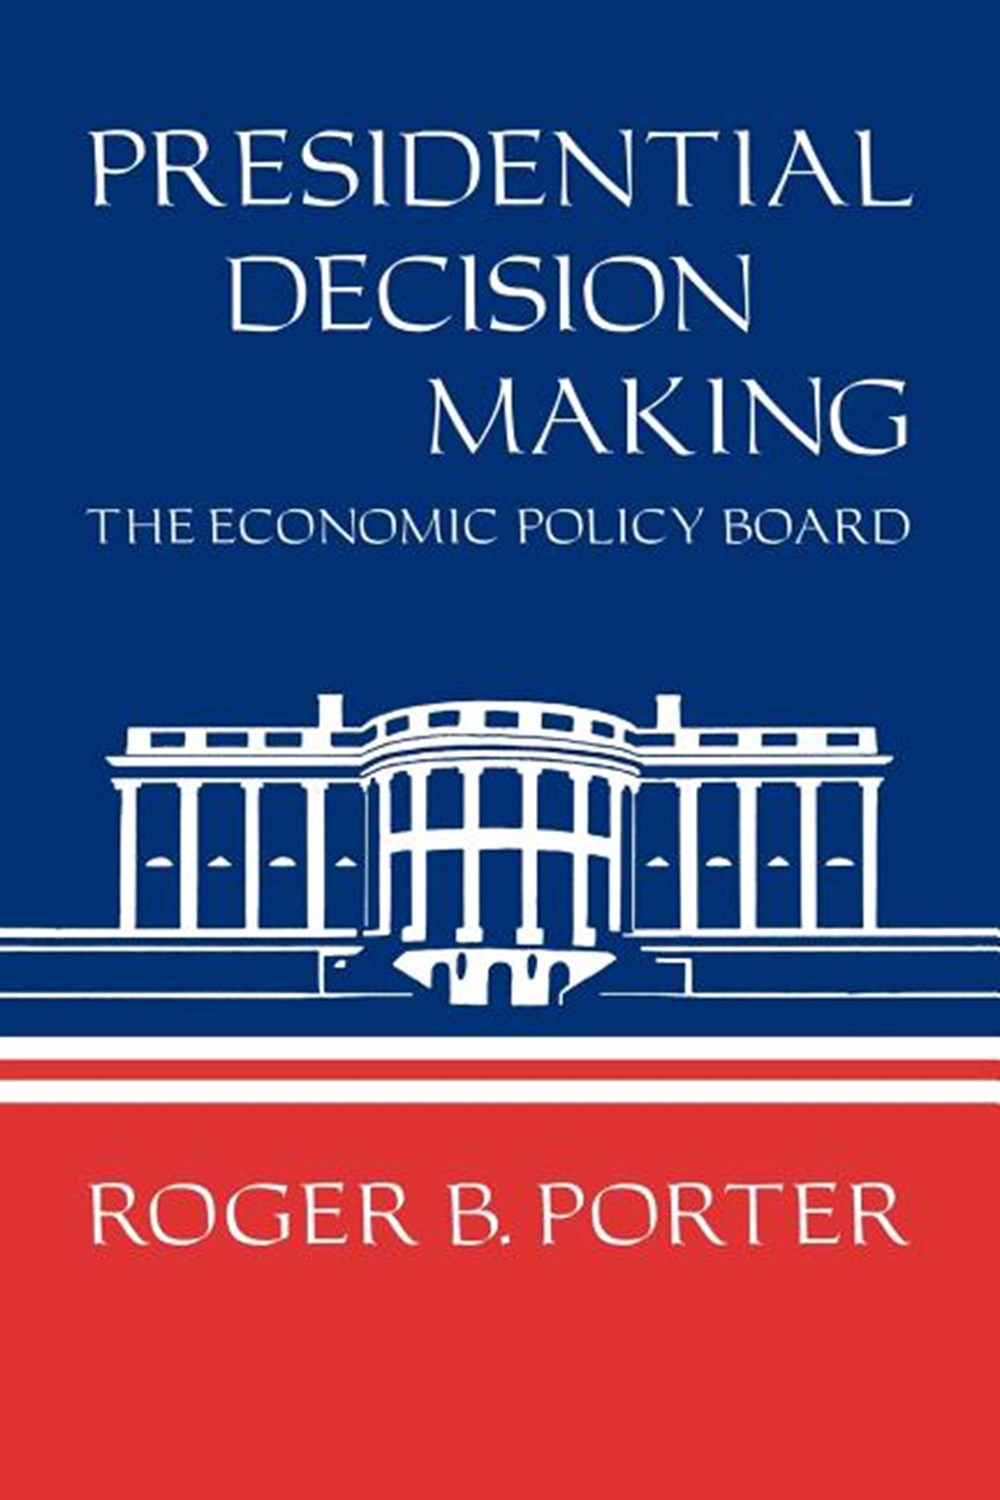 Presidential Decision Making: The Economic Policy Board (Revised)